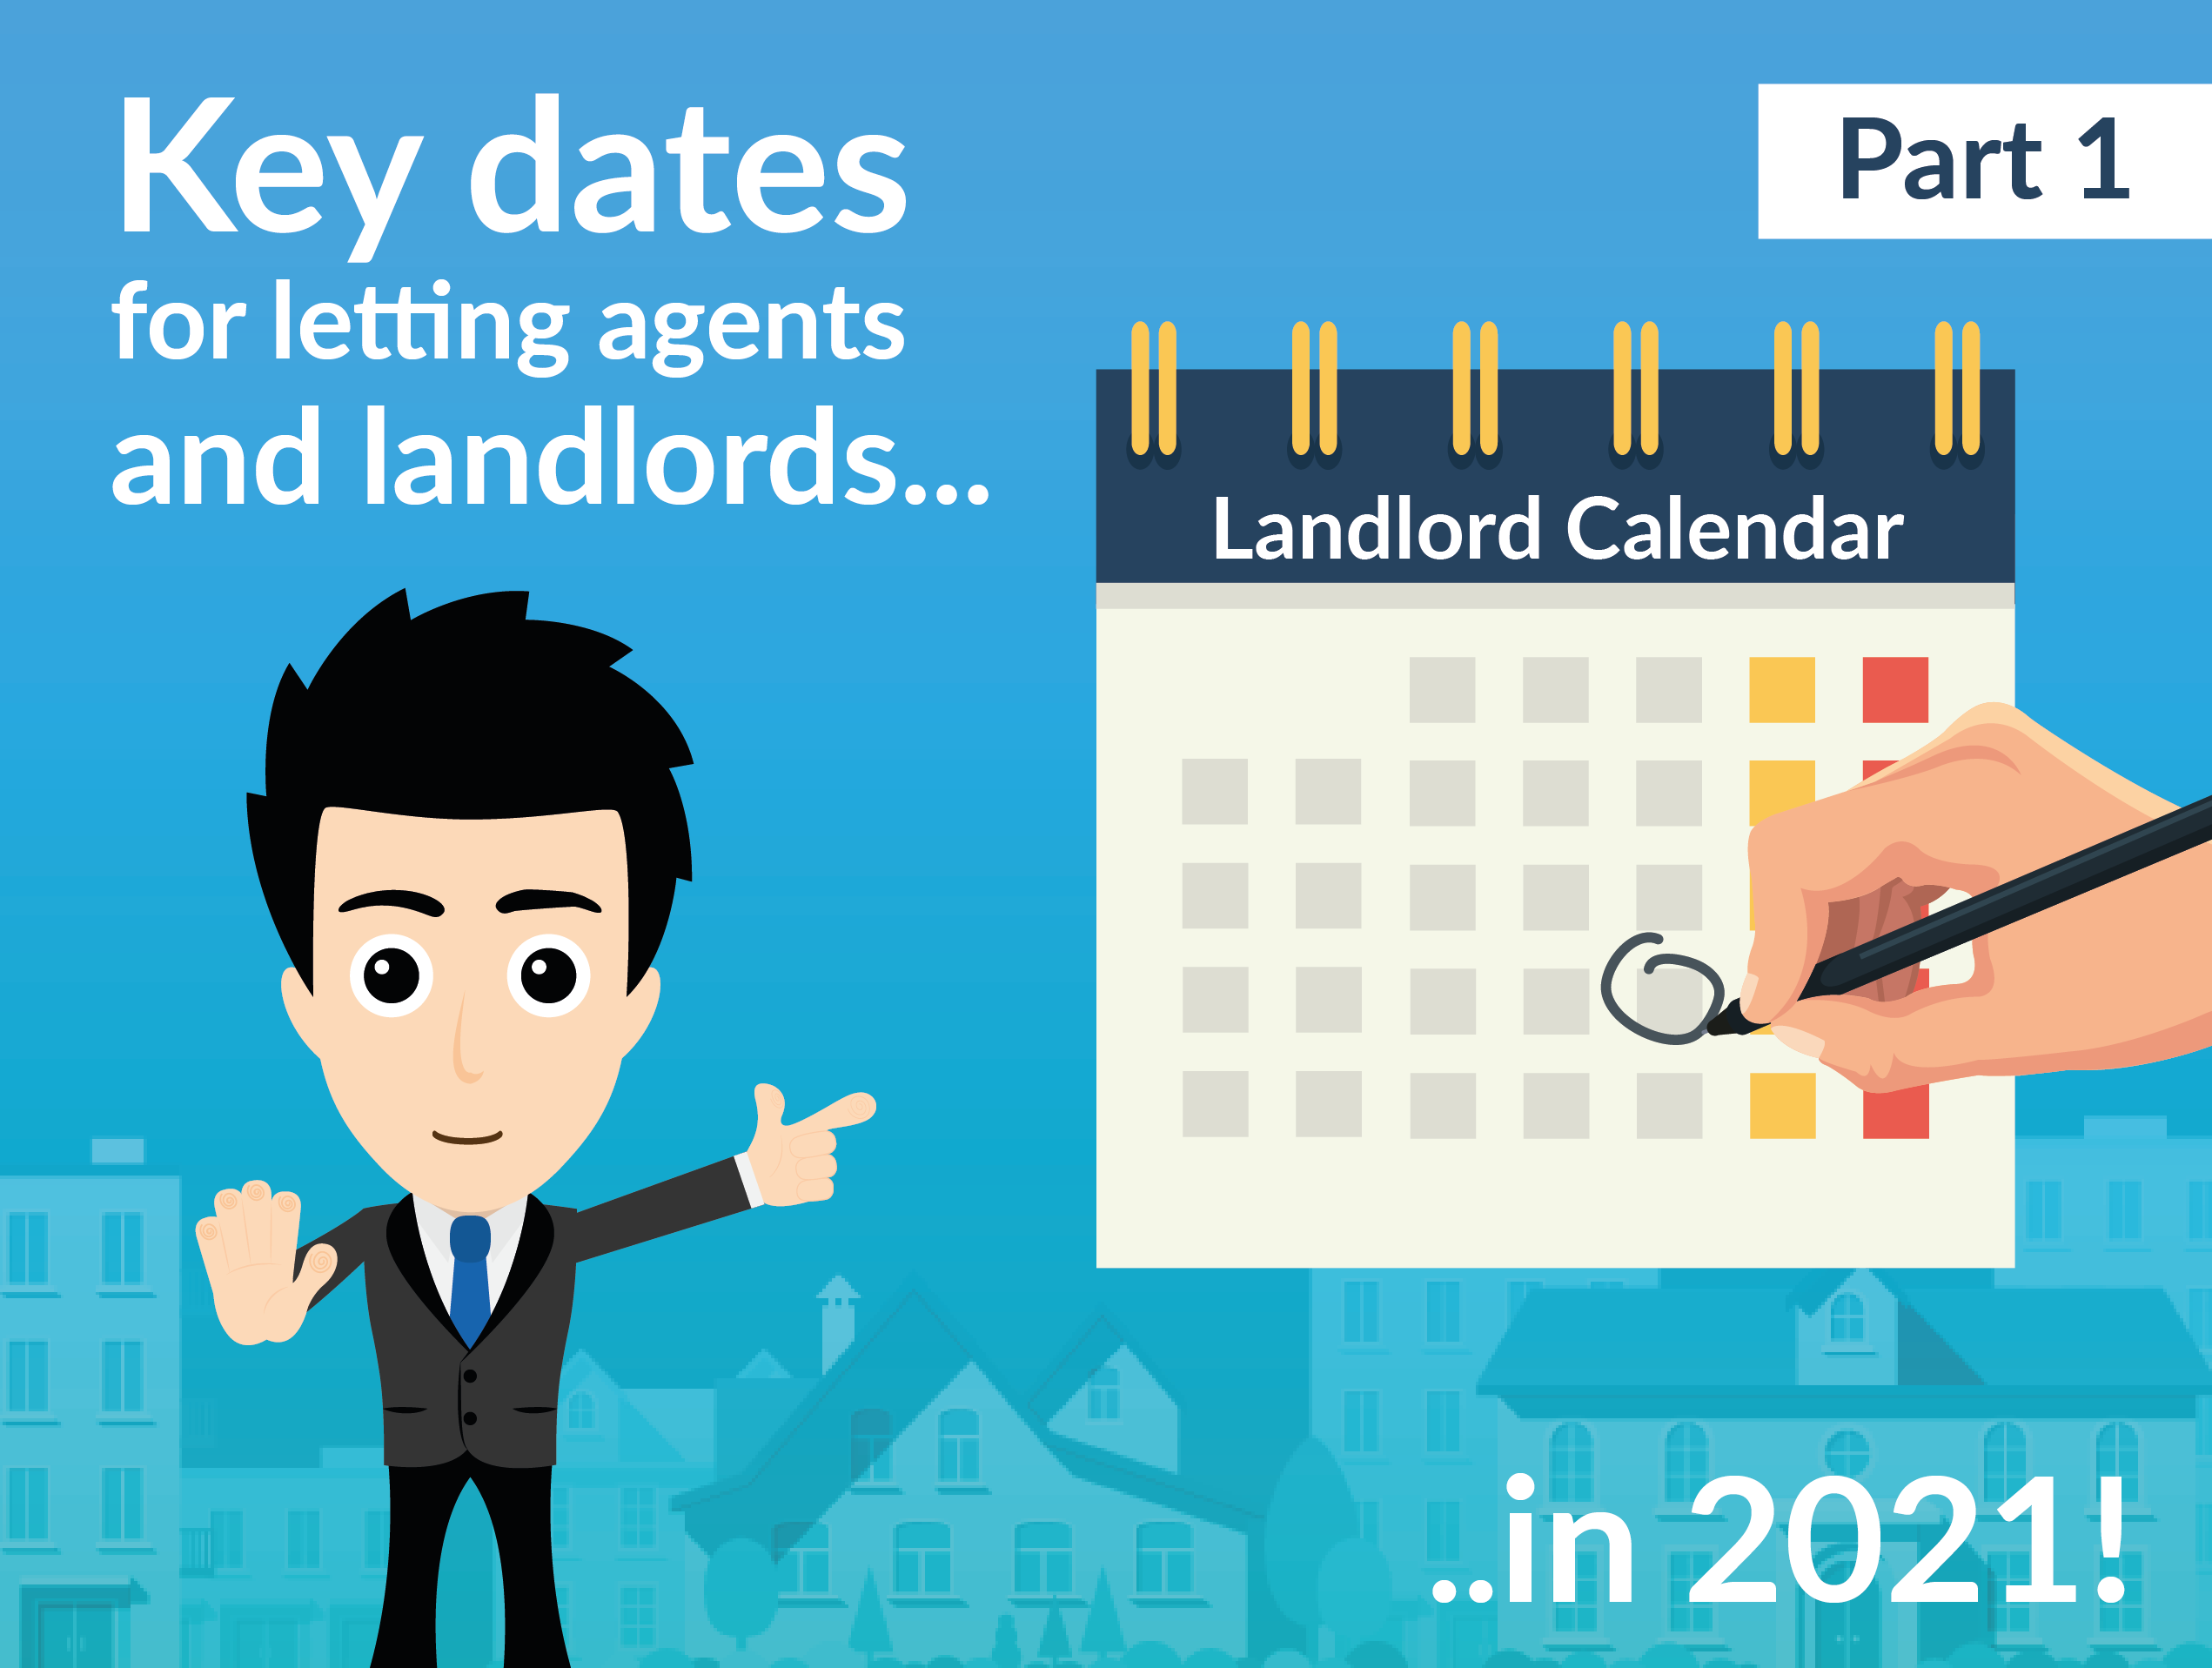 Part One: Key dates for letting agents and landlords in 2021